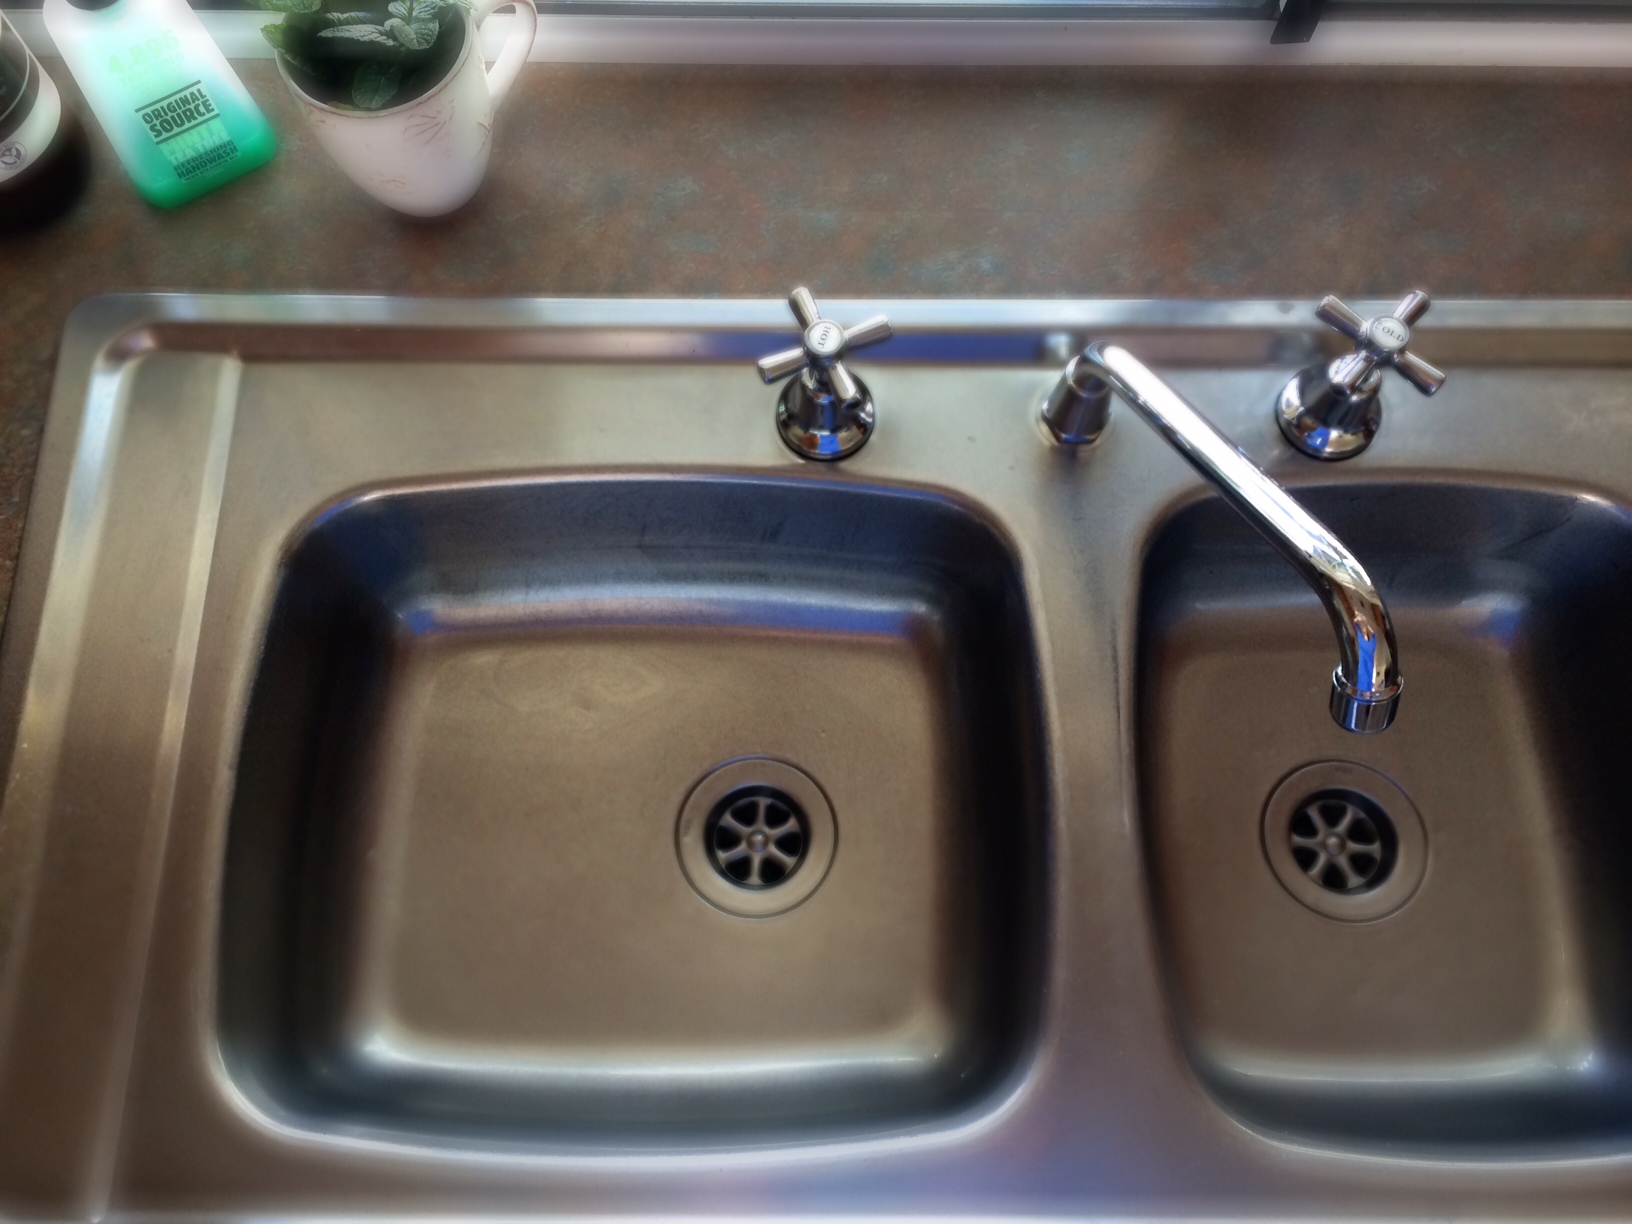 Cleaning the kitchen sink without harsh chemicals